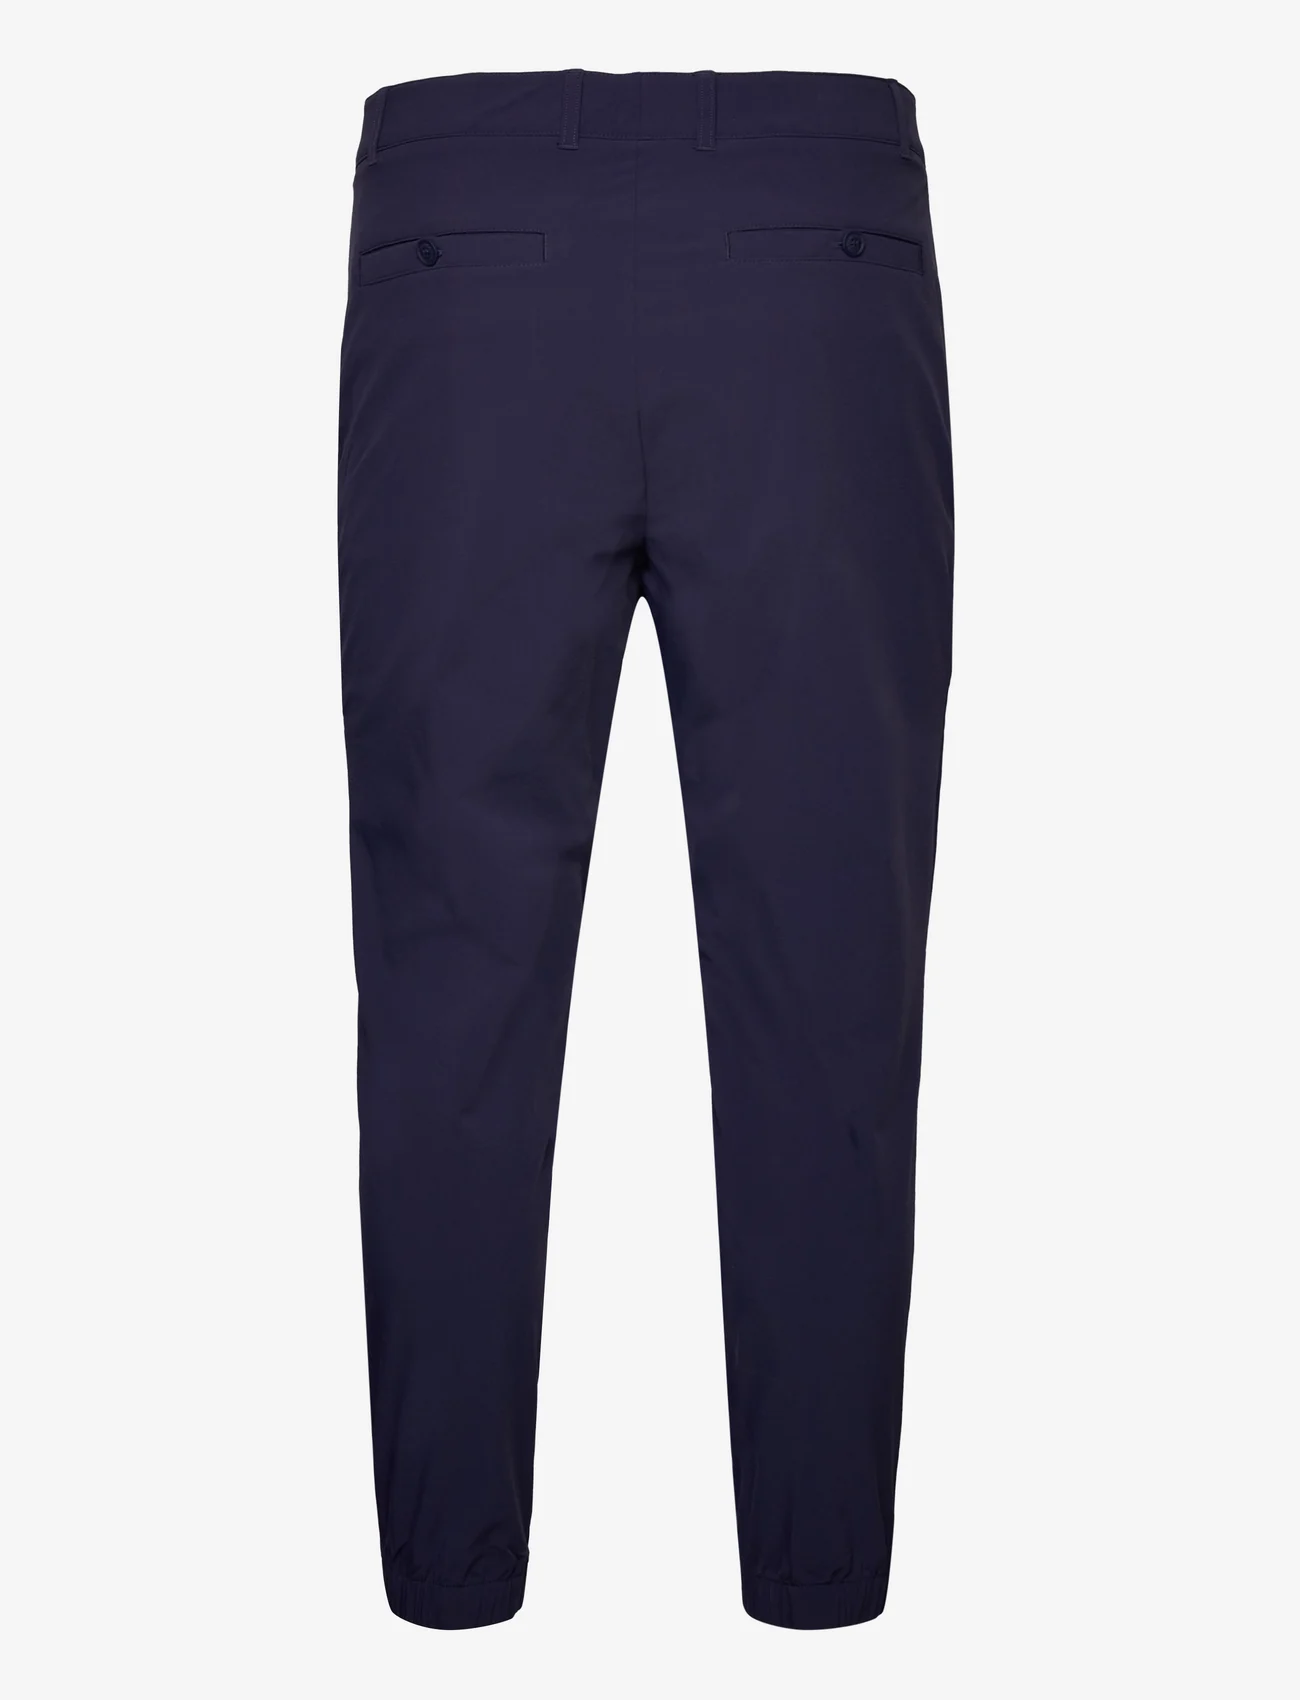 Lacoste - TROUSERS - golf pants - navy blue - 1